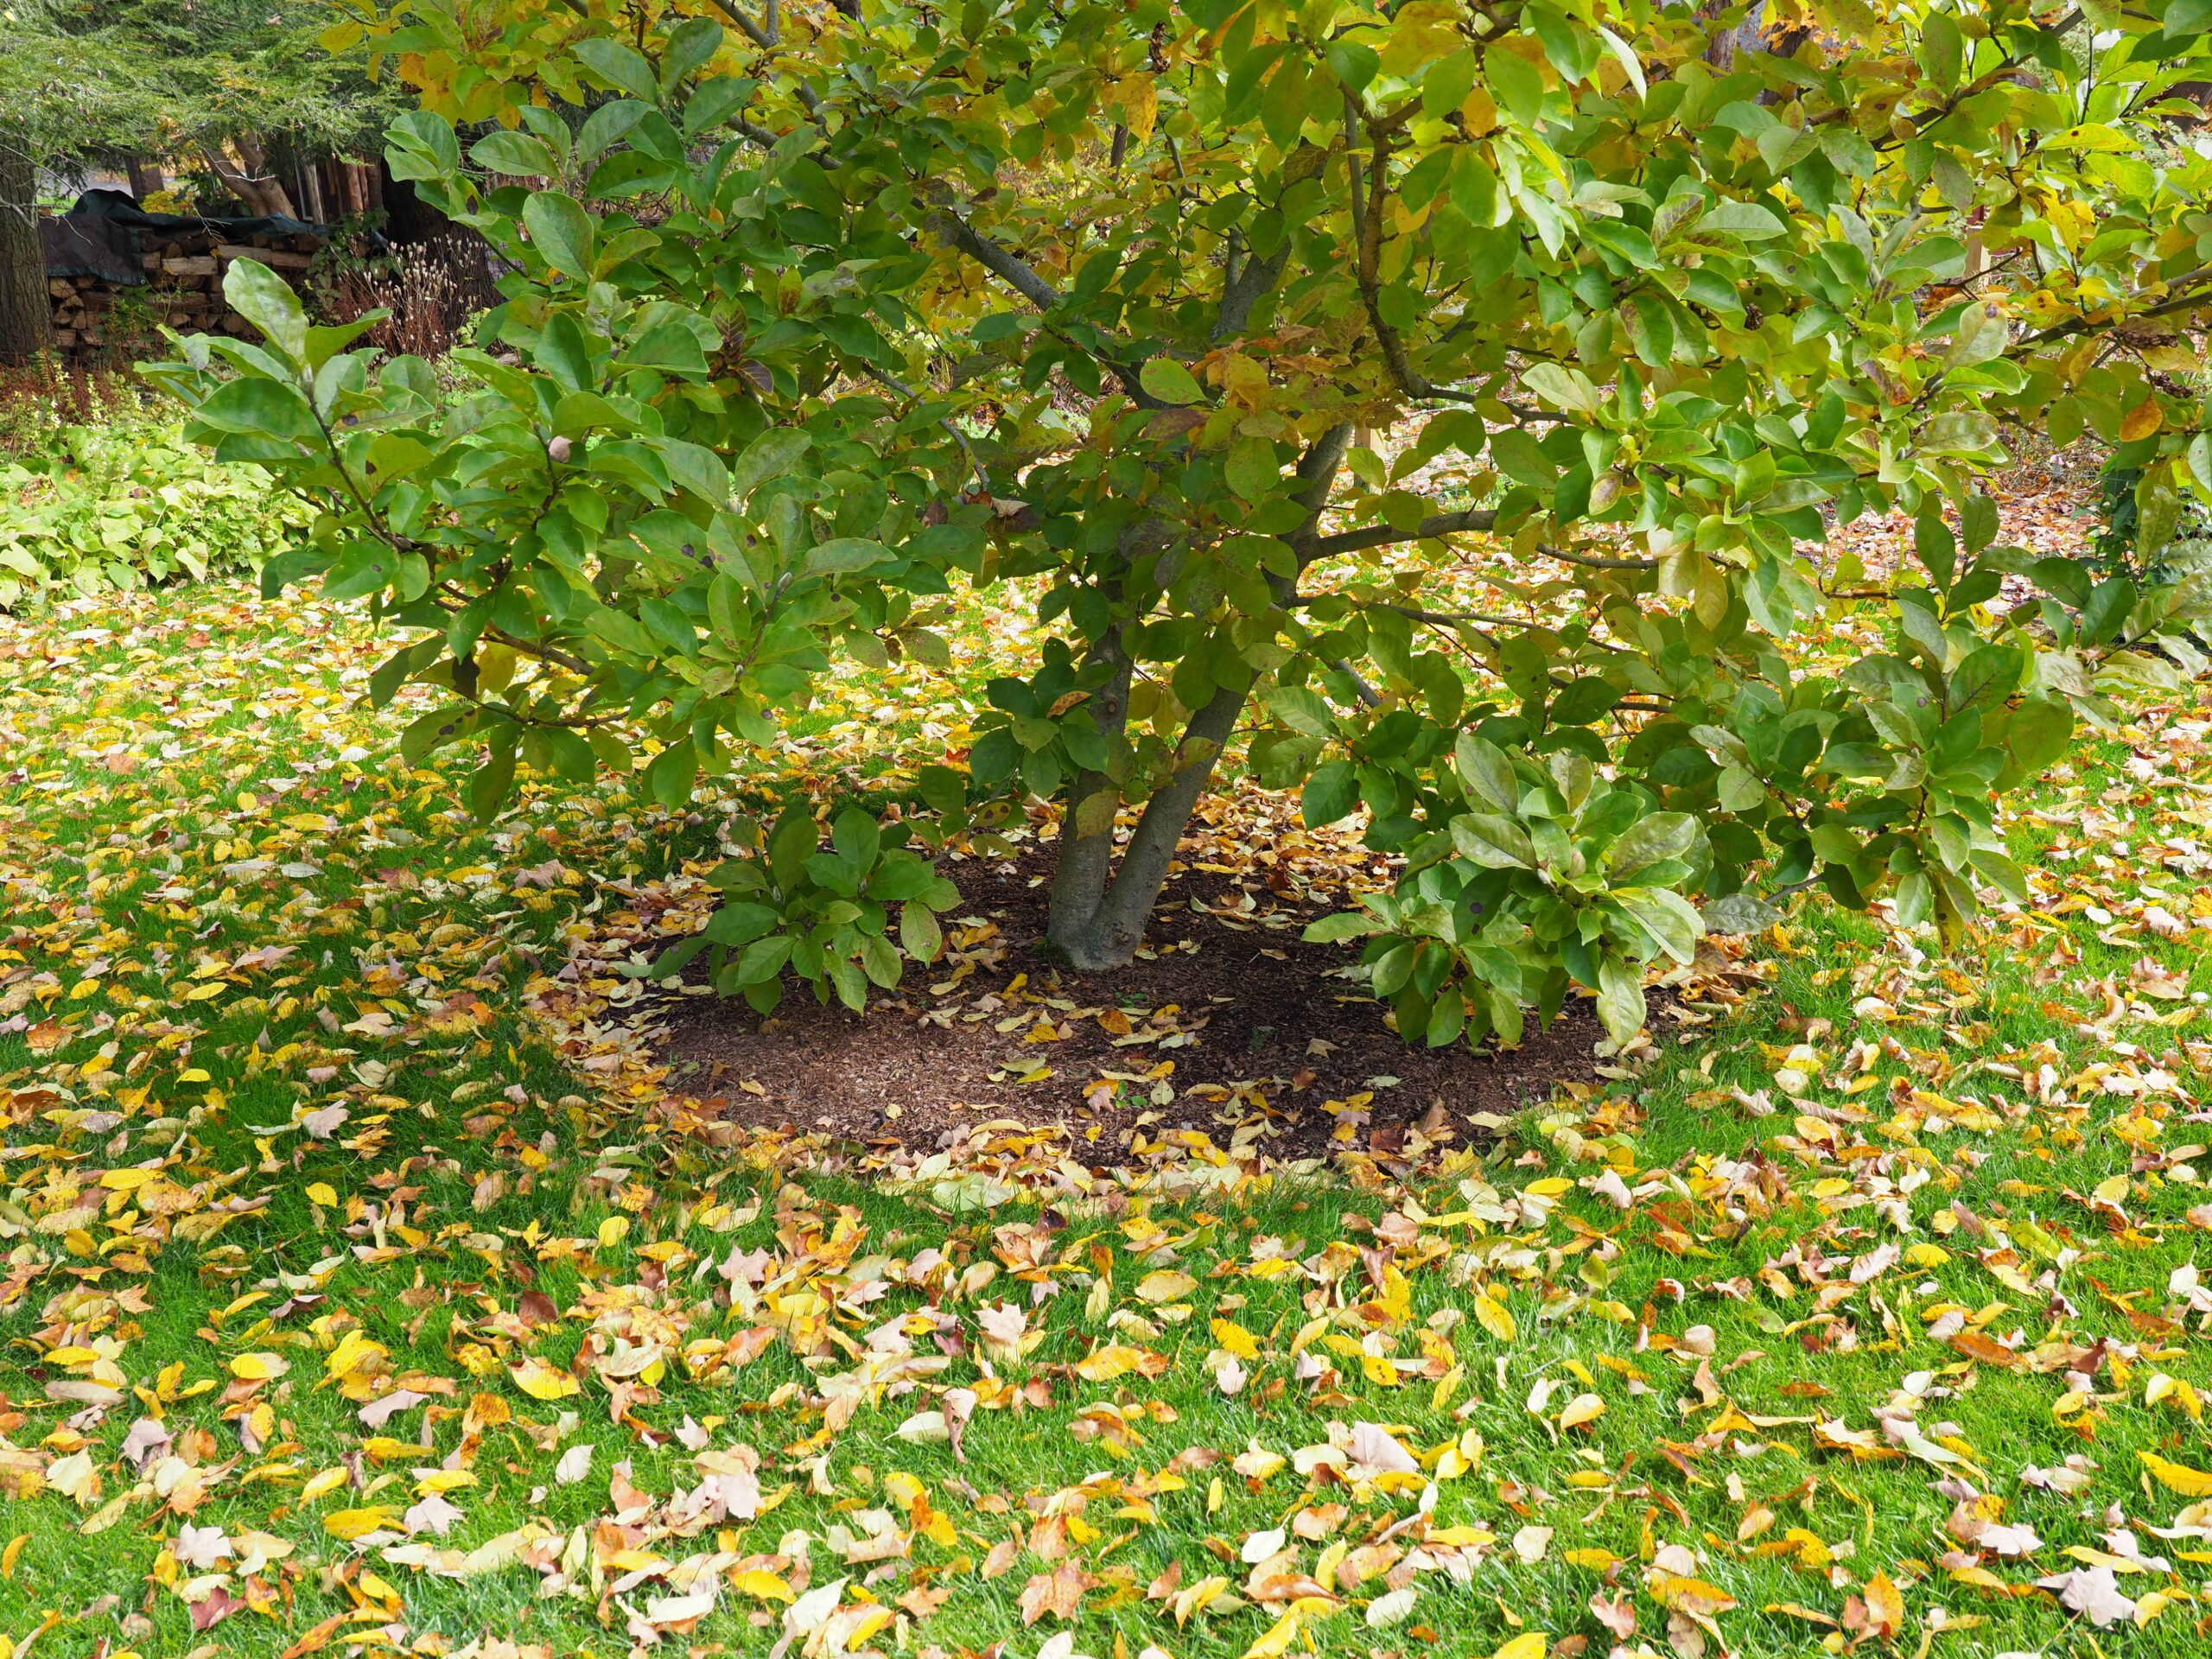 Another larger magnolia with an even larger mulch ring. It’s still not large enough though. In the best of all worlds this mulch ring should reach out to the drip line of the outermost foliage. In this case the mulch ring is only 6 feet in diameter, but based on the drip line it should be 14 feet. By removing the grass and extending the mulch area. nutrients are added as the mulch decays and the grass isn’t sucking up the nutrients that the tree should be getting. ANDREW MESSINGER